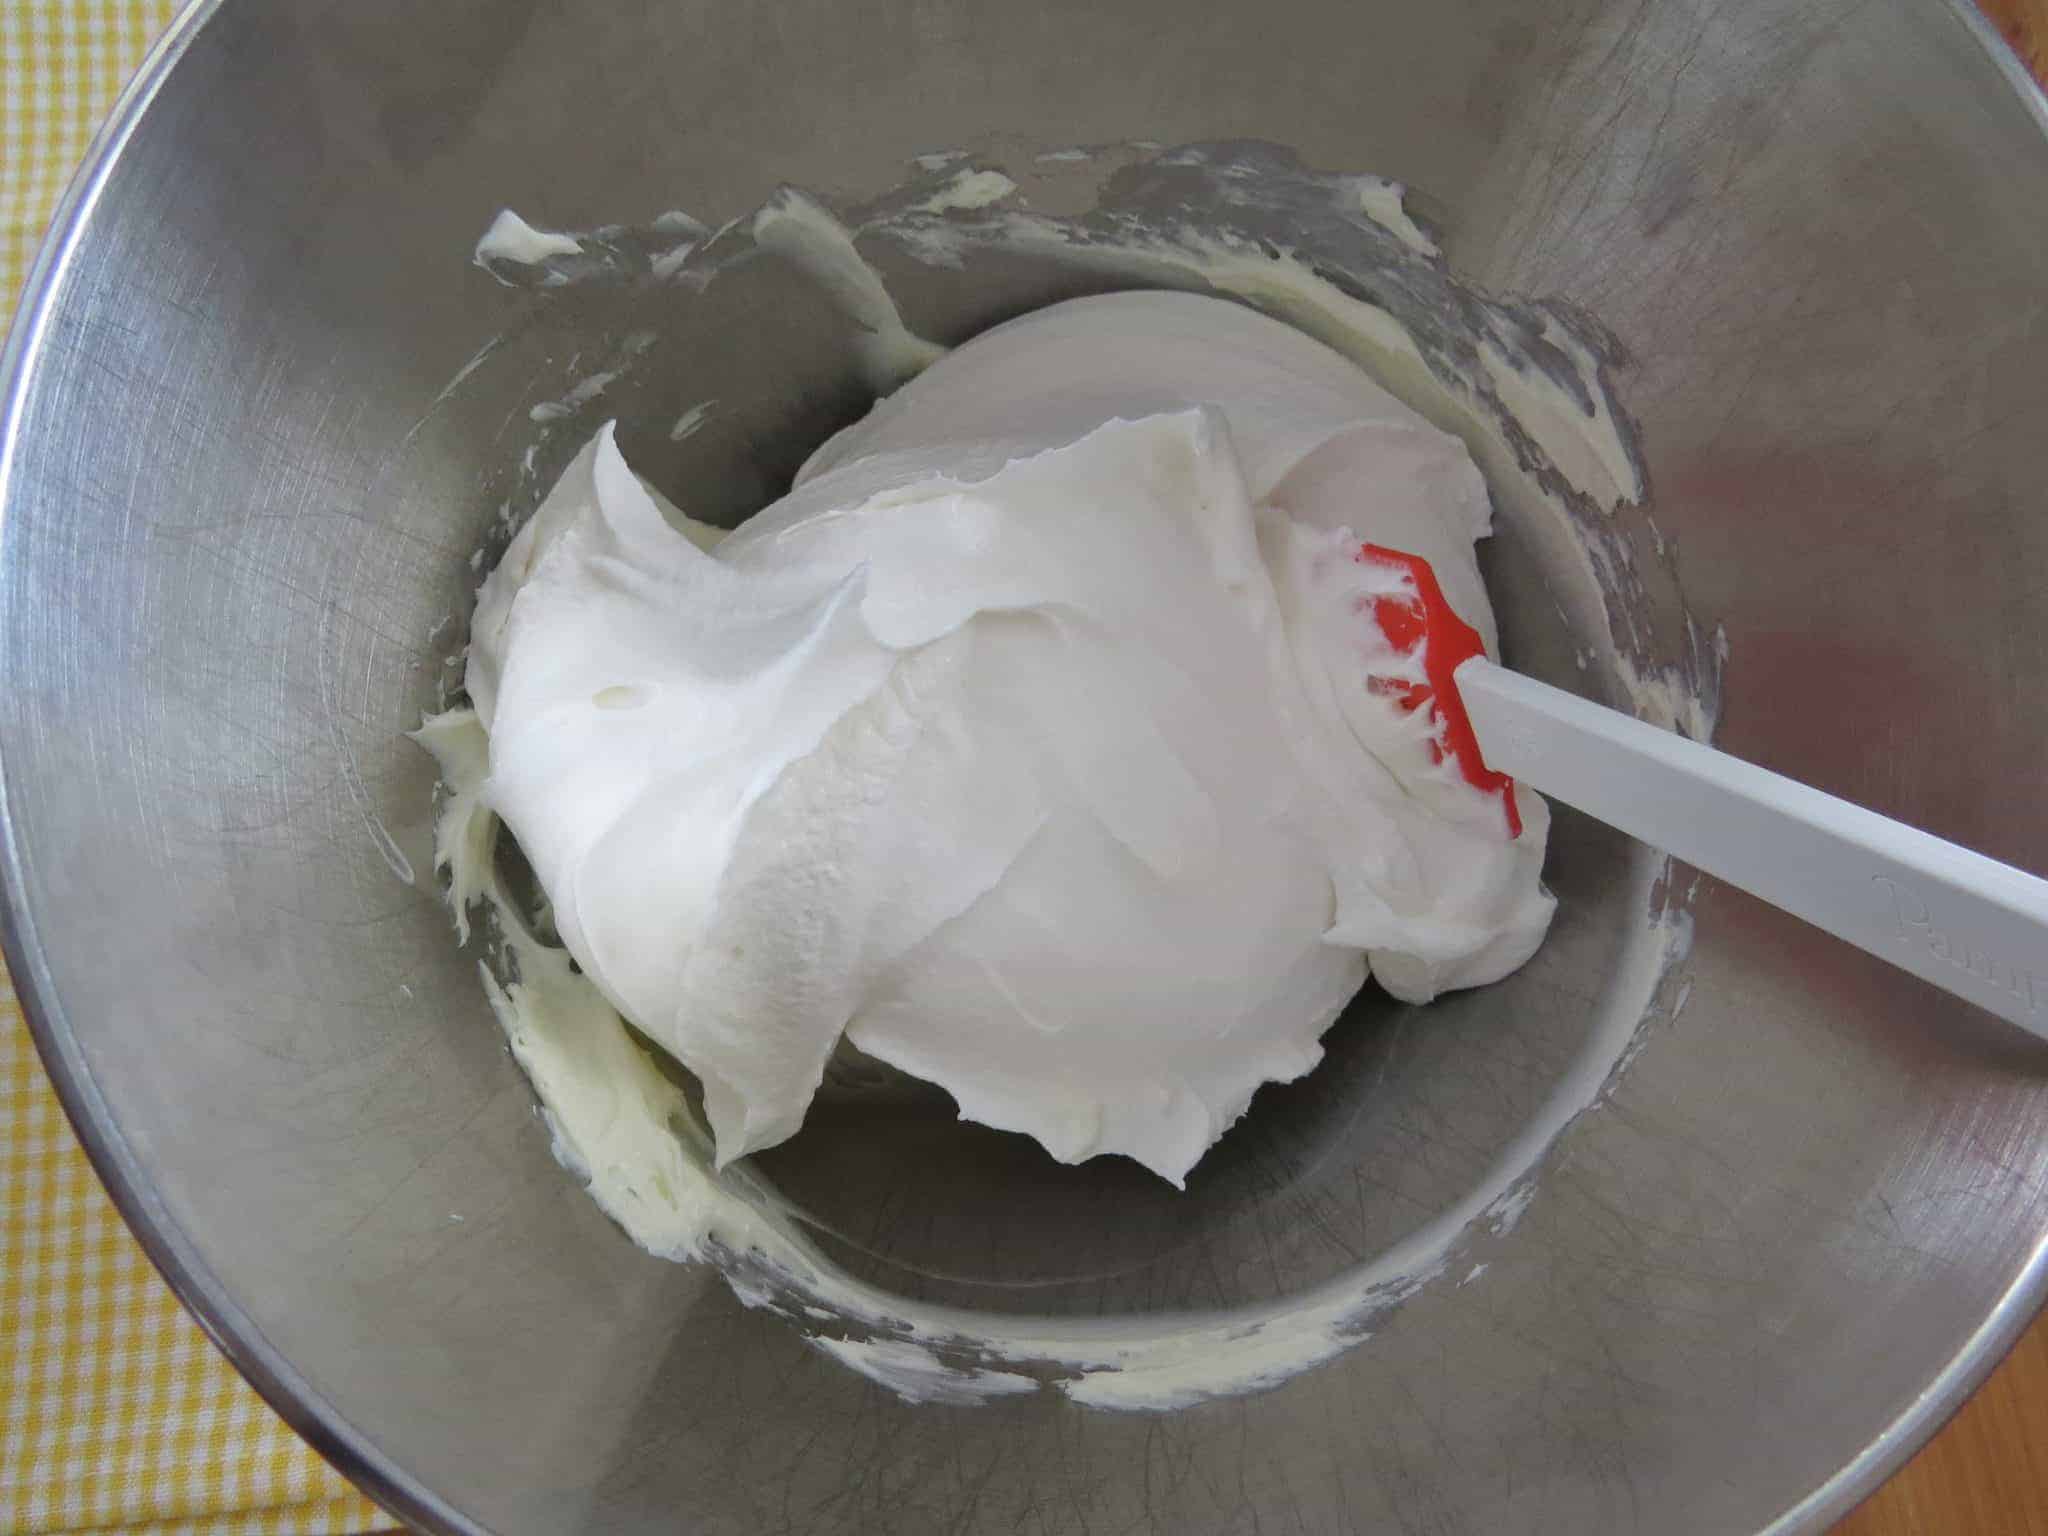 whipped topping stirred together with sweetened cream cheese mixture.